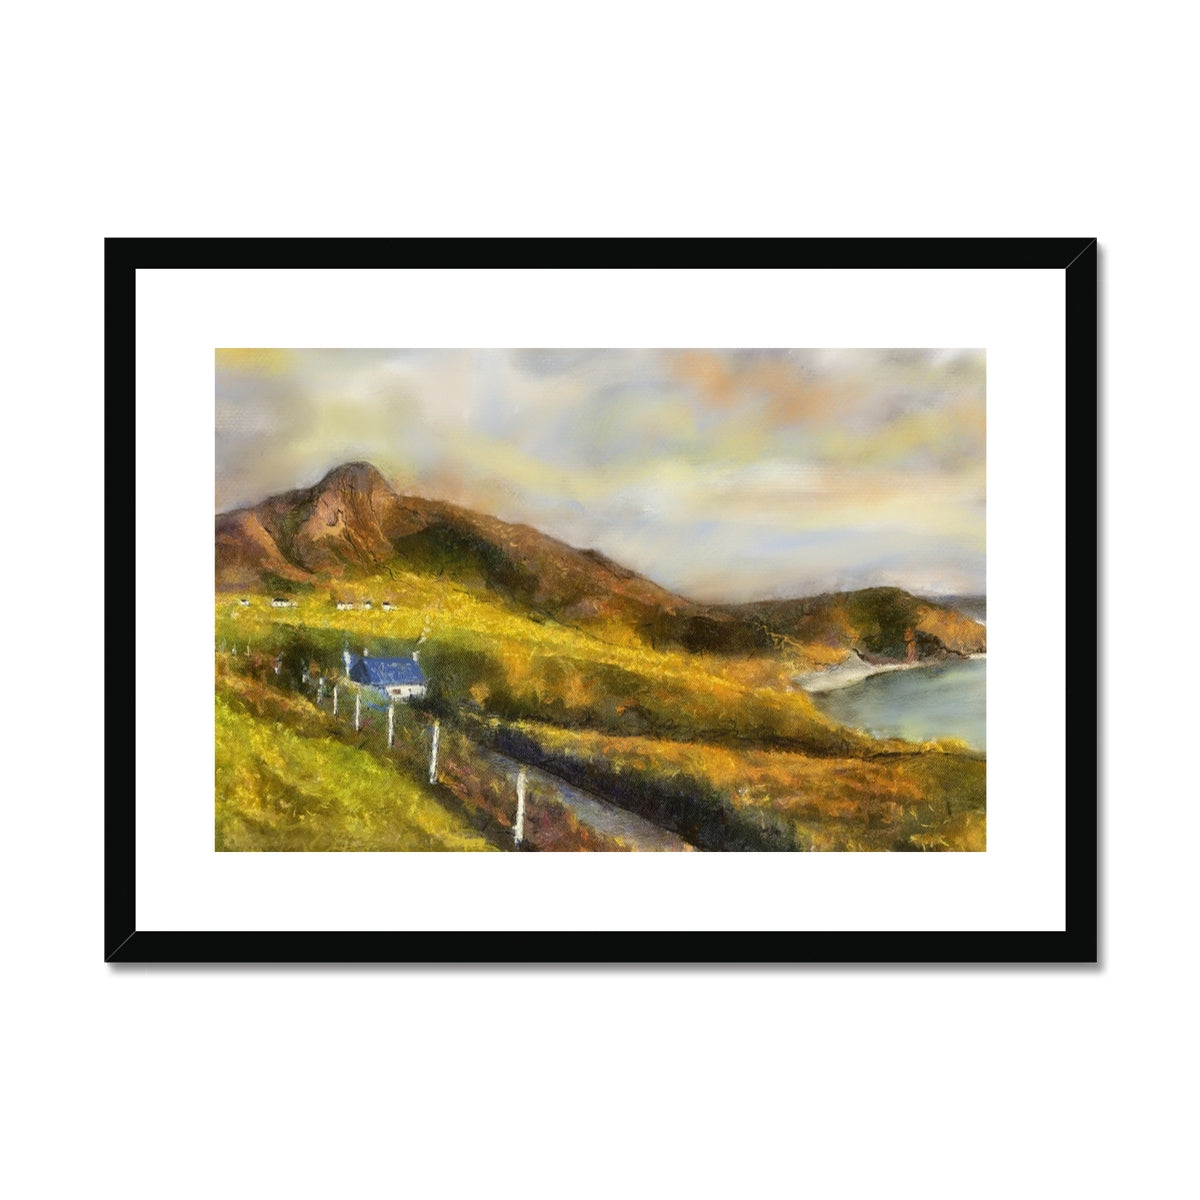 Coldbackie Painting | Framed & Mounted Prints From Scotland-Framed & Mounted Prints-Scottish Highlands & Lowlands Art Gallery-A2 Landscape-Black Frame-Paintings, Prints, Homeware, Art Gifts From Scotland By Scottish Artist Kevin Hunter